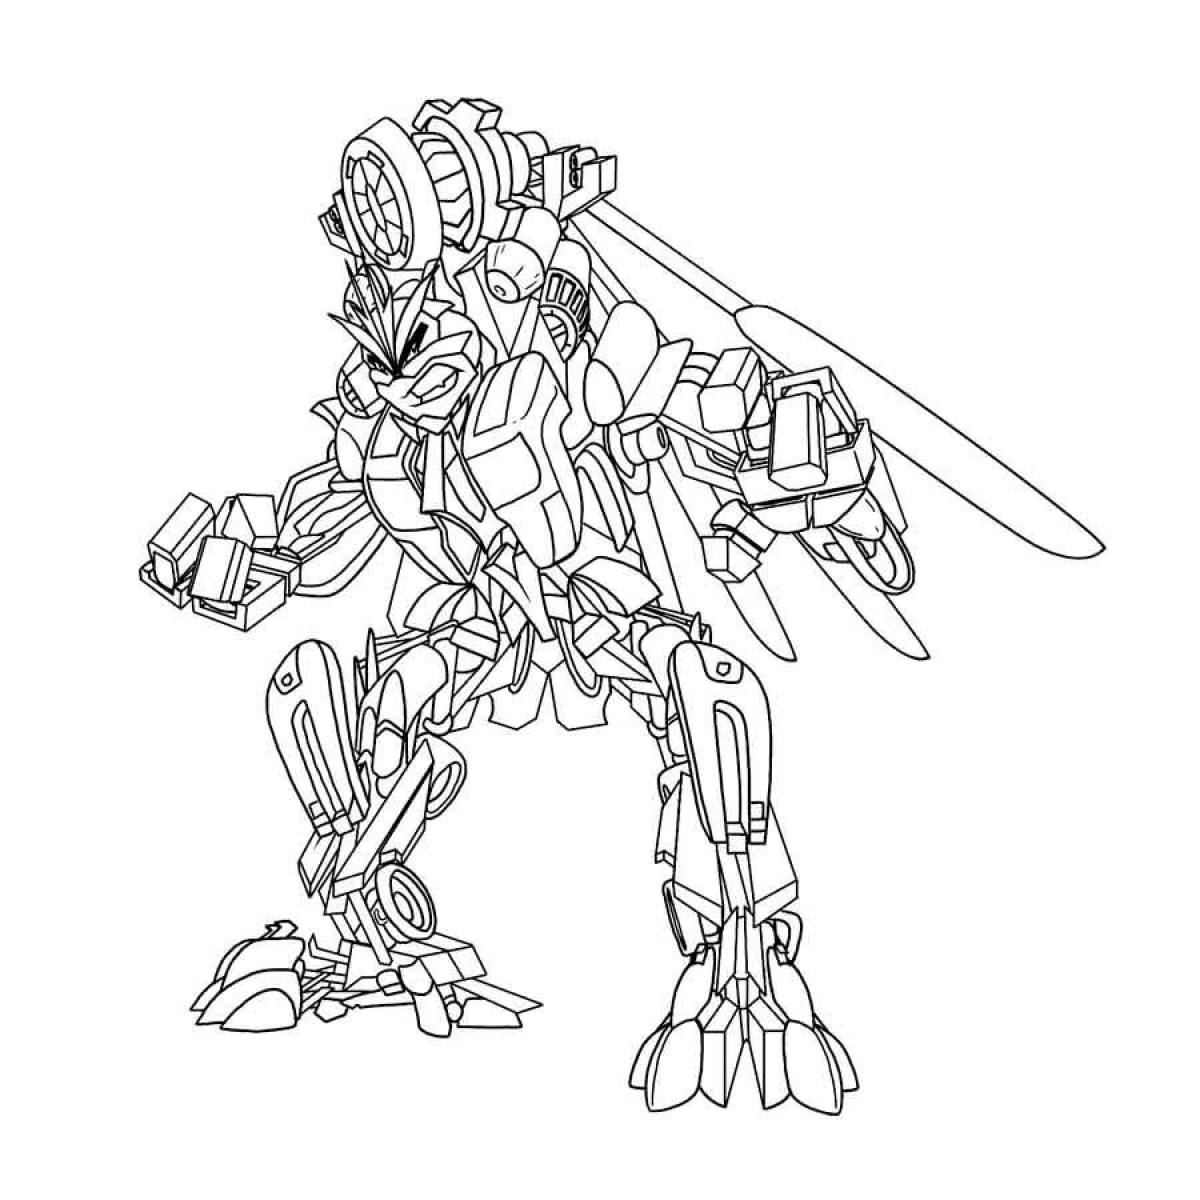 Impressive transformers coloring page